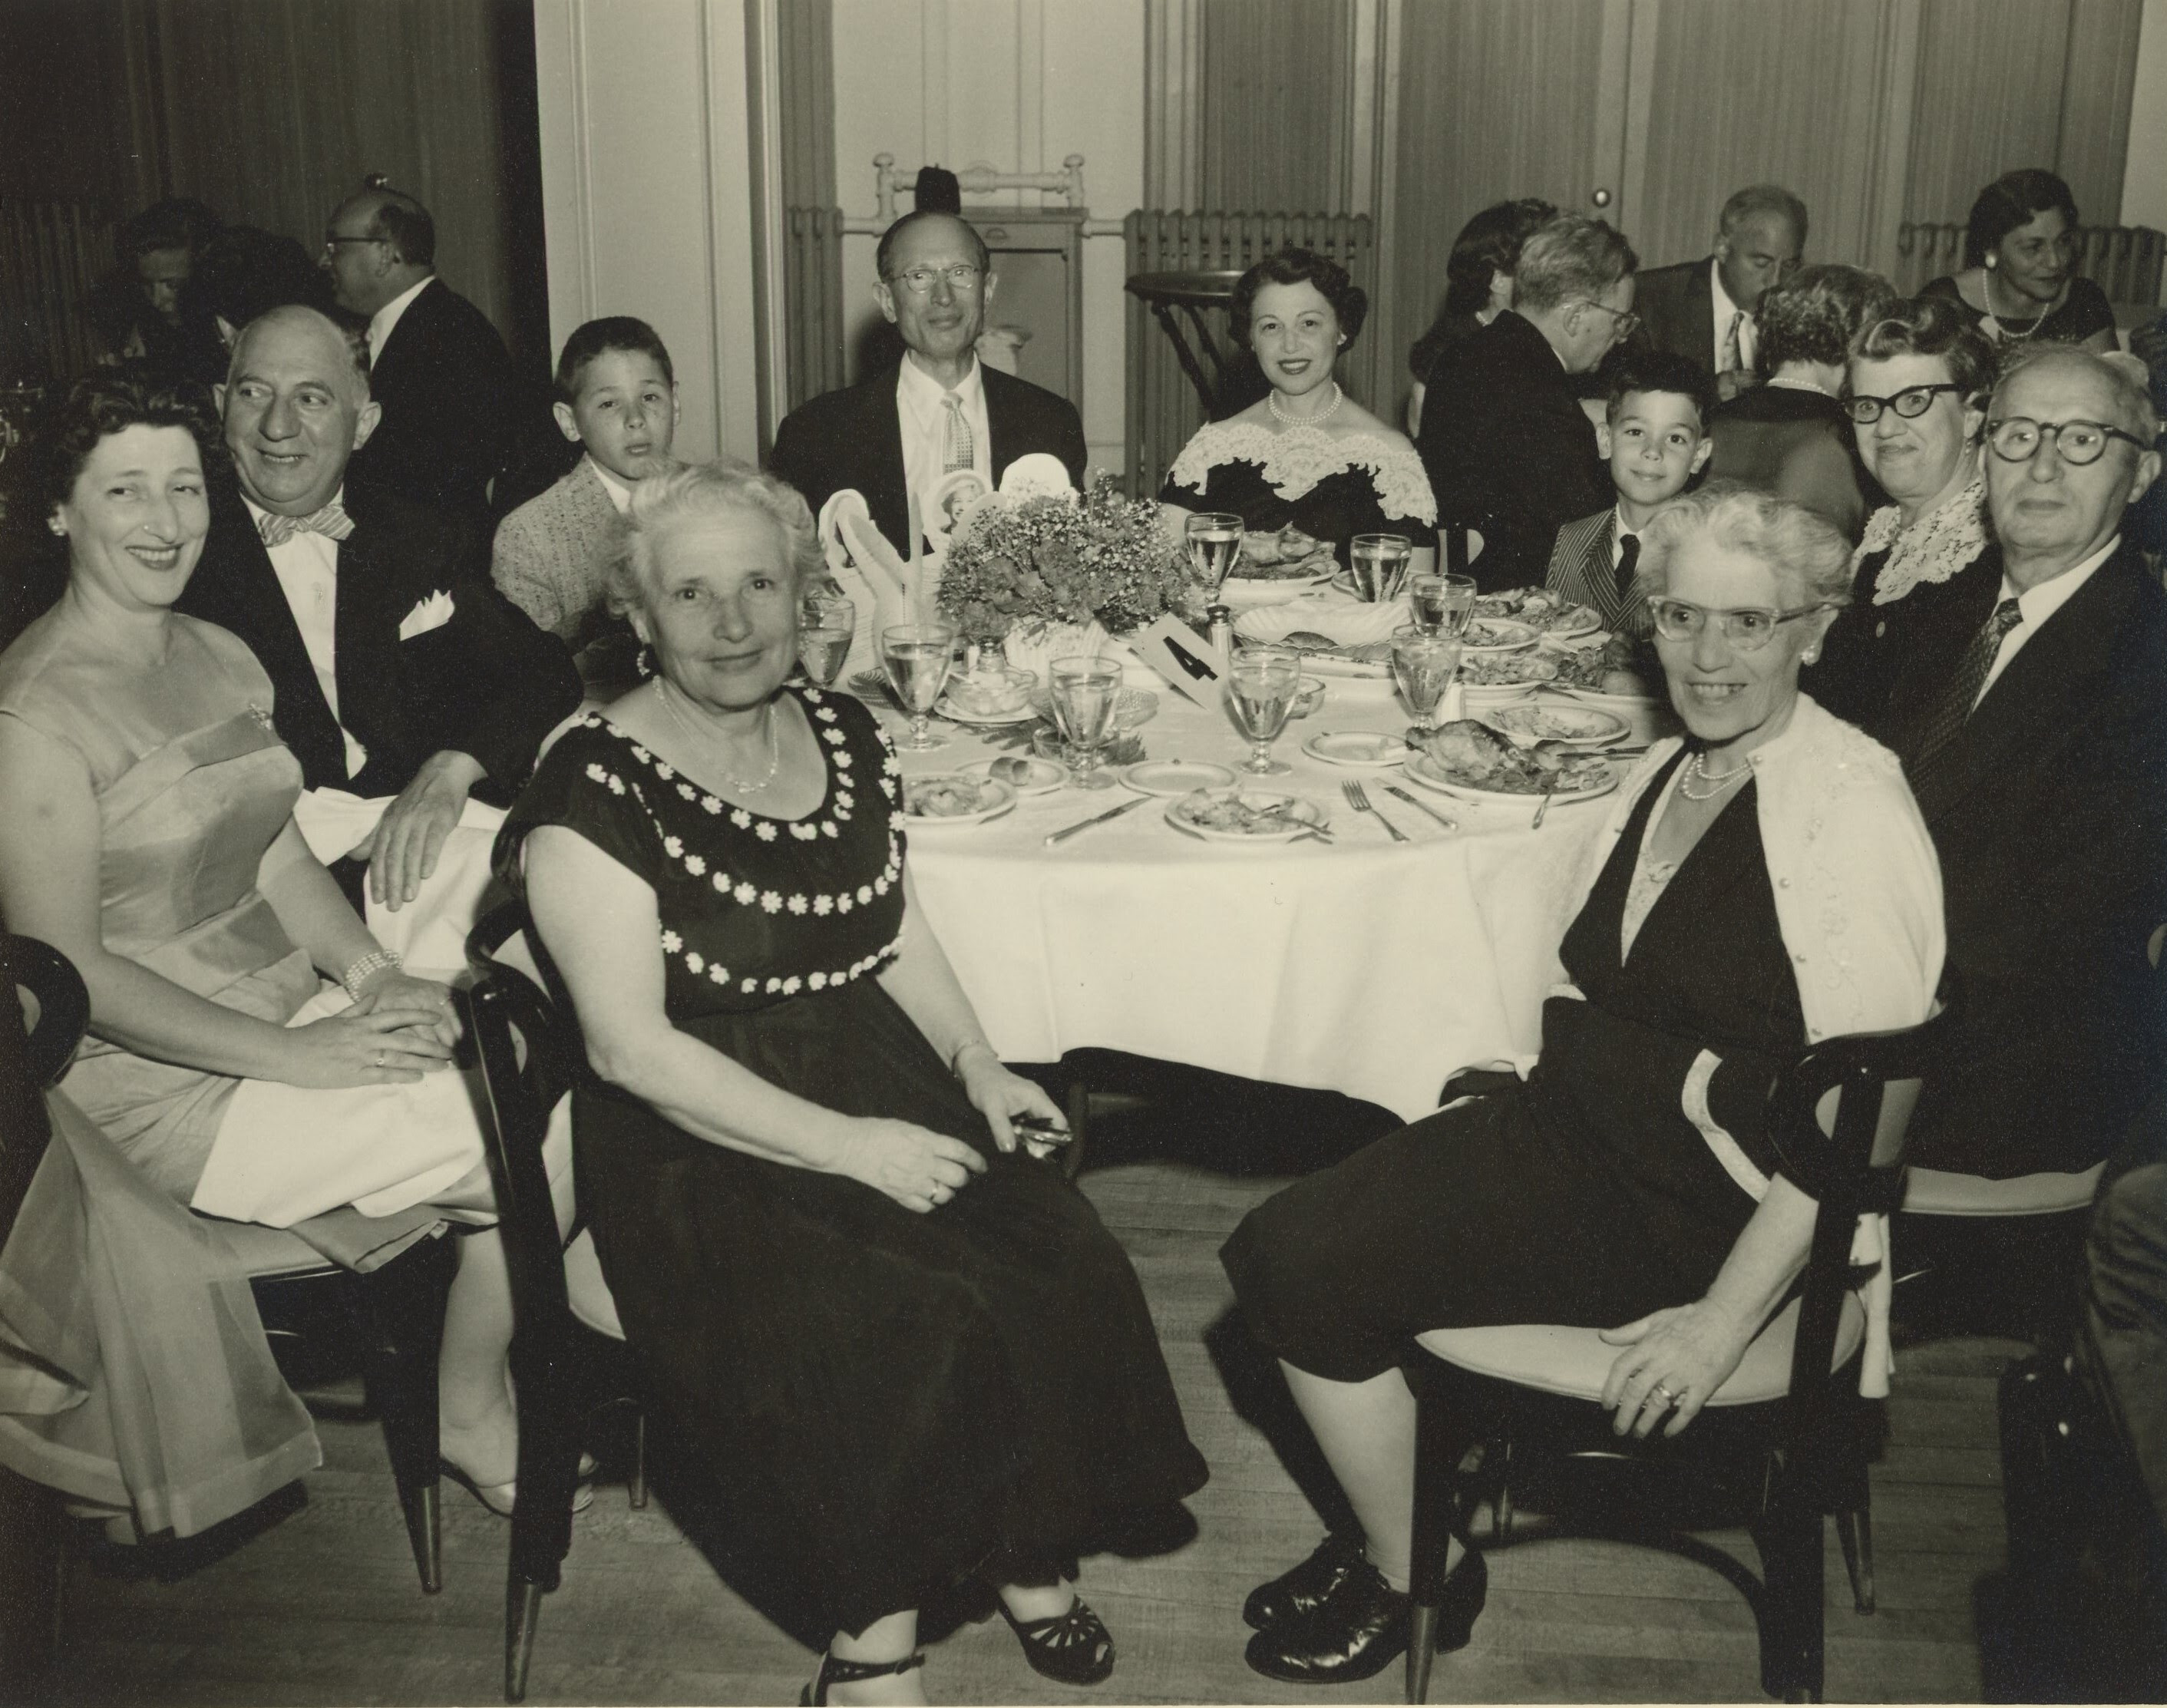 Pictured on the left in a family gathering are Estelle and Sidney Kaplan